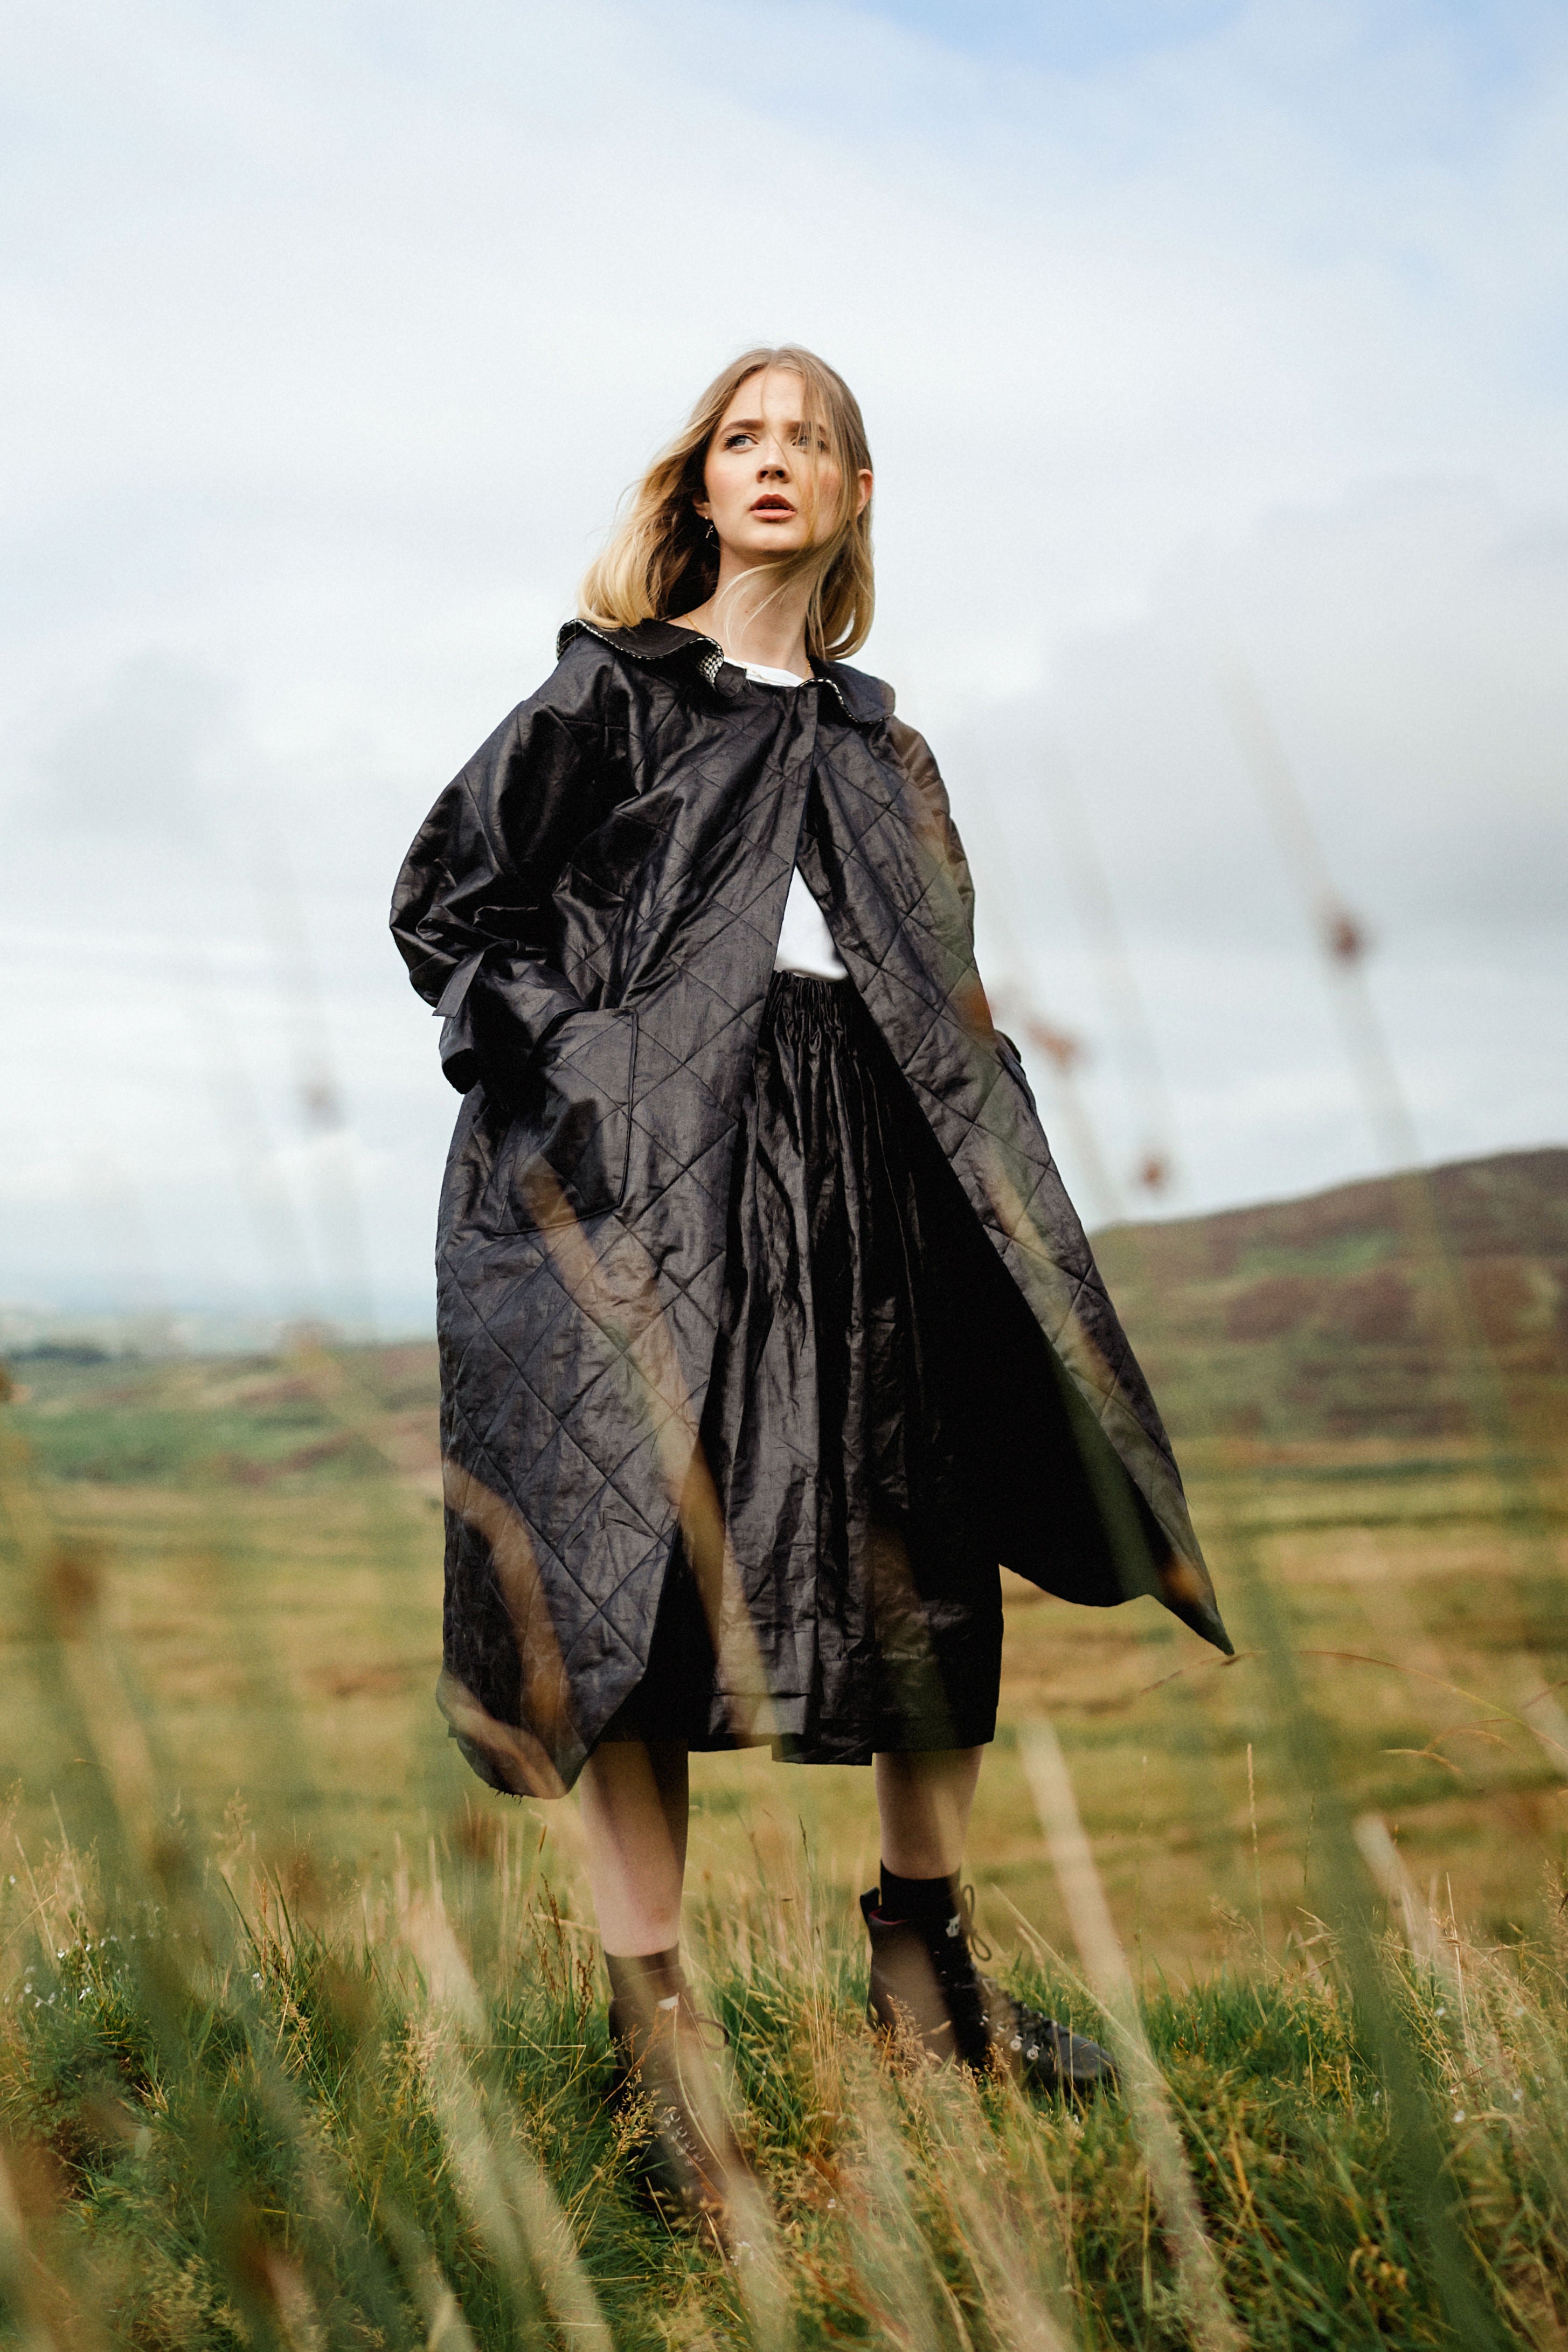 CLOUD COAT | The structured silhouette of our AW Cloud coat is inspired by something we are famous for in Ireland - cloudy skies. Created with Irish Beetled linen. This ancient technique sees the fabric repeatedly beaten with wooden blocks for hours on en